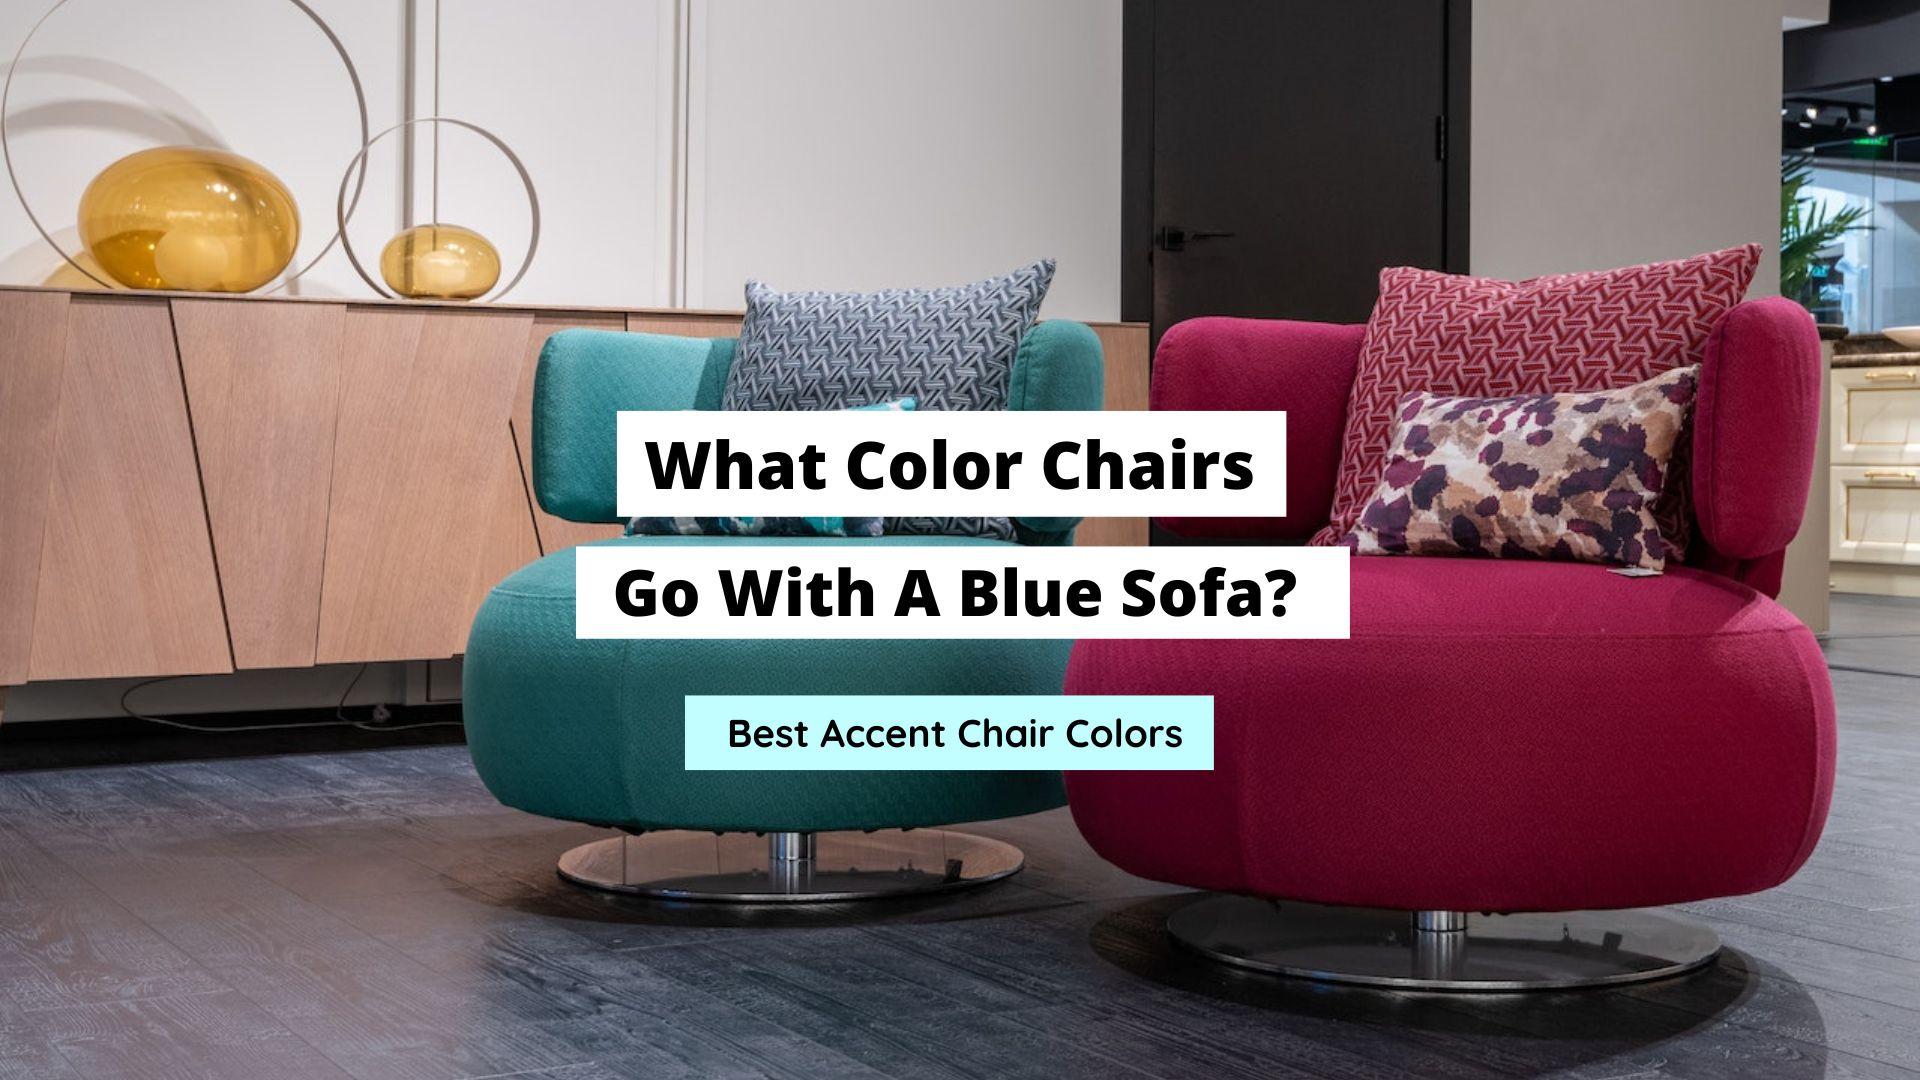 What Color Chairs Go With A Blue Sofa